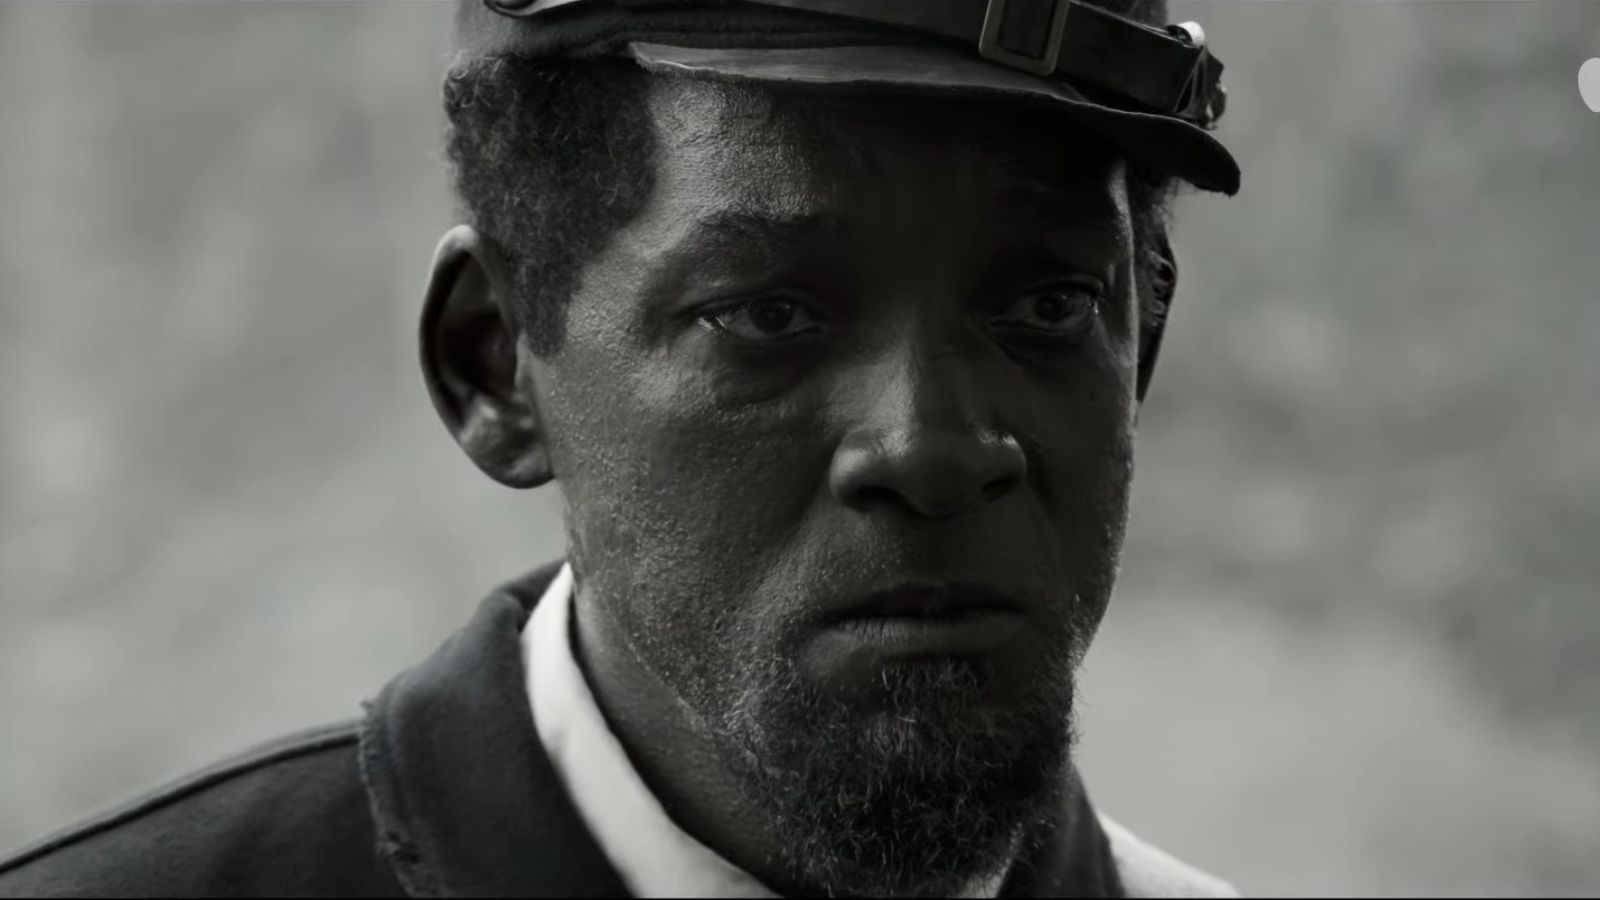 Will Smith's 'Emancipation' trailer drops to instant criticism from Black fans